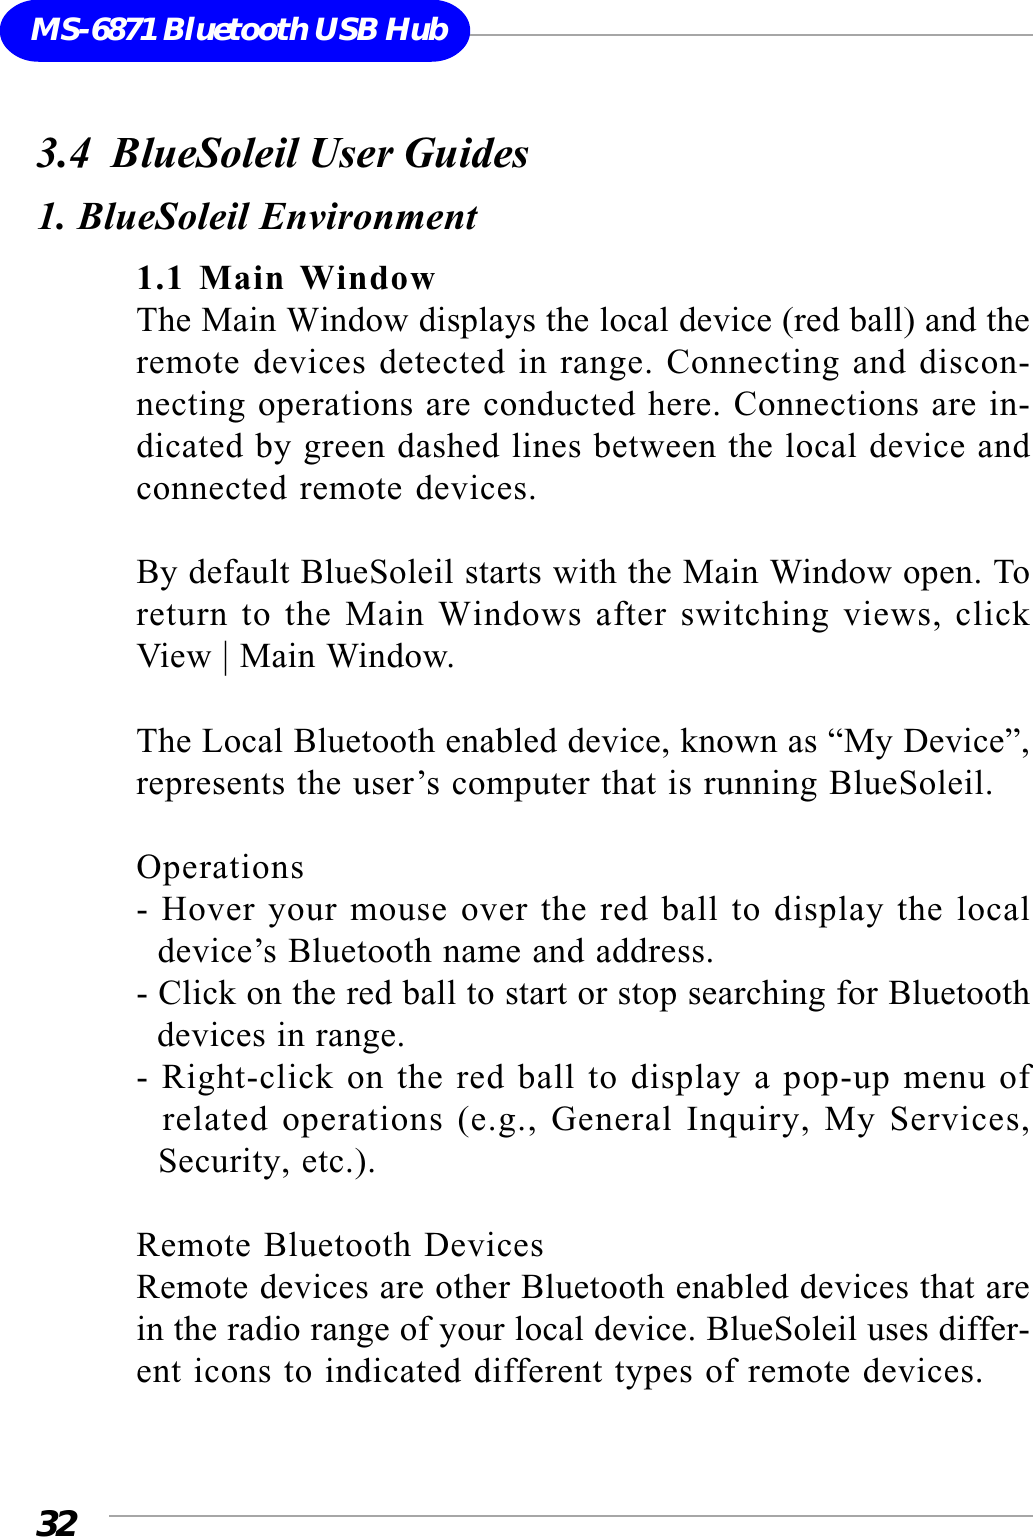 32MS-6871 Bluetooth USB Hub3.4  BlueSoleil User Guides1. BlueSoleil Environment1.1 Main WindowThe Main Window displays the local device (red ball) and theremote devices detected in range. Connecting and discon-necting operations are conducted here. Connections are in-dicated by green dashed lines between the local device andconnected remote devices.By default BlueSoleil starts with the Main Window open. Toreturn to the Main Windows after switching views, clickView | Main Window.The Local Bluetooth enabled device, known as “My Device”,represents the user’s computer that is running BlueSoleil.Operations- Hover your mouse over the red ball to display the local  device’s Bluetooth name and address.- Click on the red ball to start or stop searching for Bluetooth  devices in range.- Right-click on the red ball to display a pop-up menu of  related operations (e.g., General Inquiry, My Services,  Security, etc.).Remote Bluetooth DevicesRemote devices are other Bluetooth enabled devices that arein the radio range of your local device. BlueSoleil uses differ-ent icons to indicated different types of remote devices.